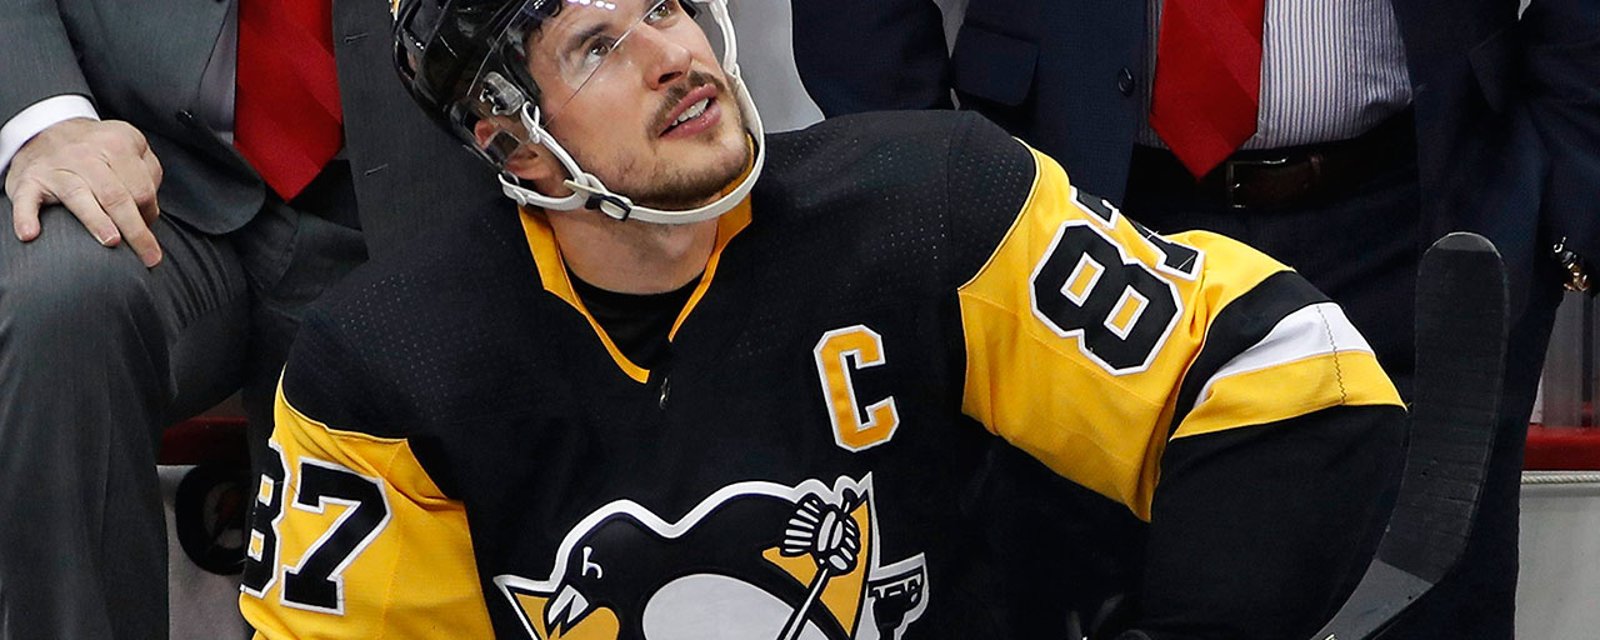 Crosby’s former teammate reveals how much of a freak he really is! 